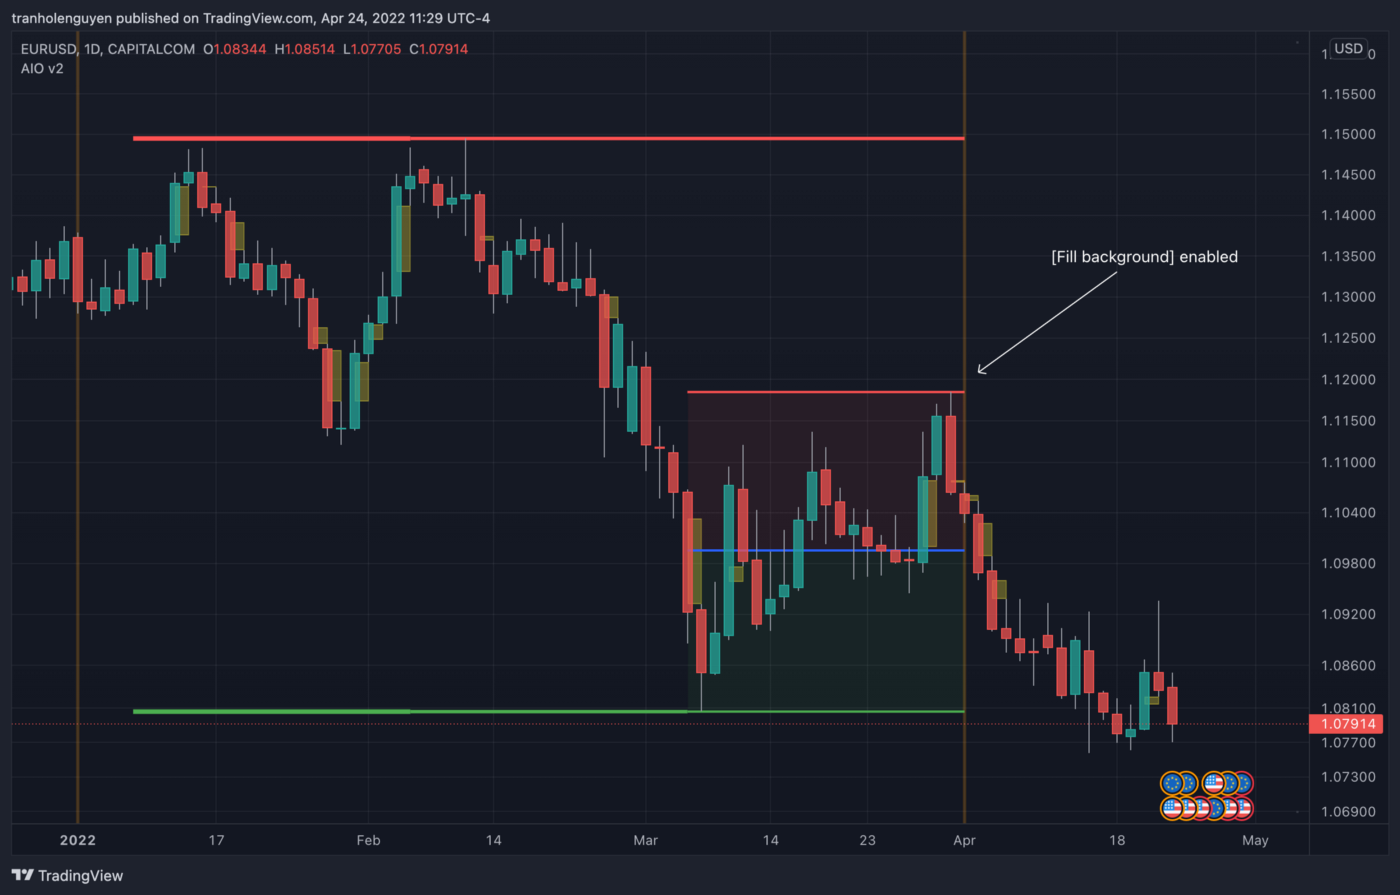 https://www.tradingview.com/x/VLCEuxUP/